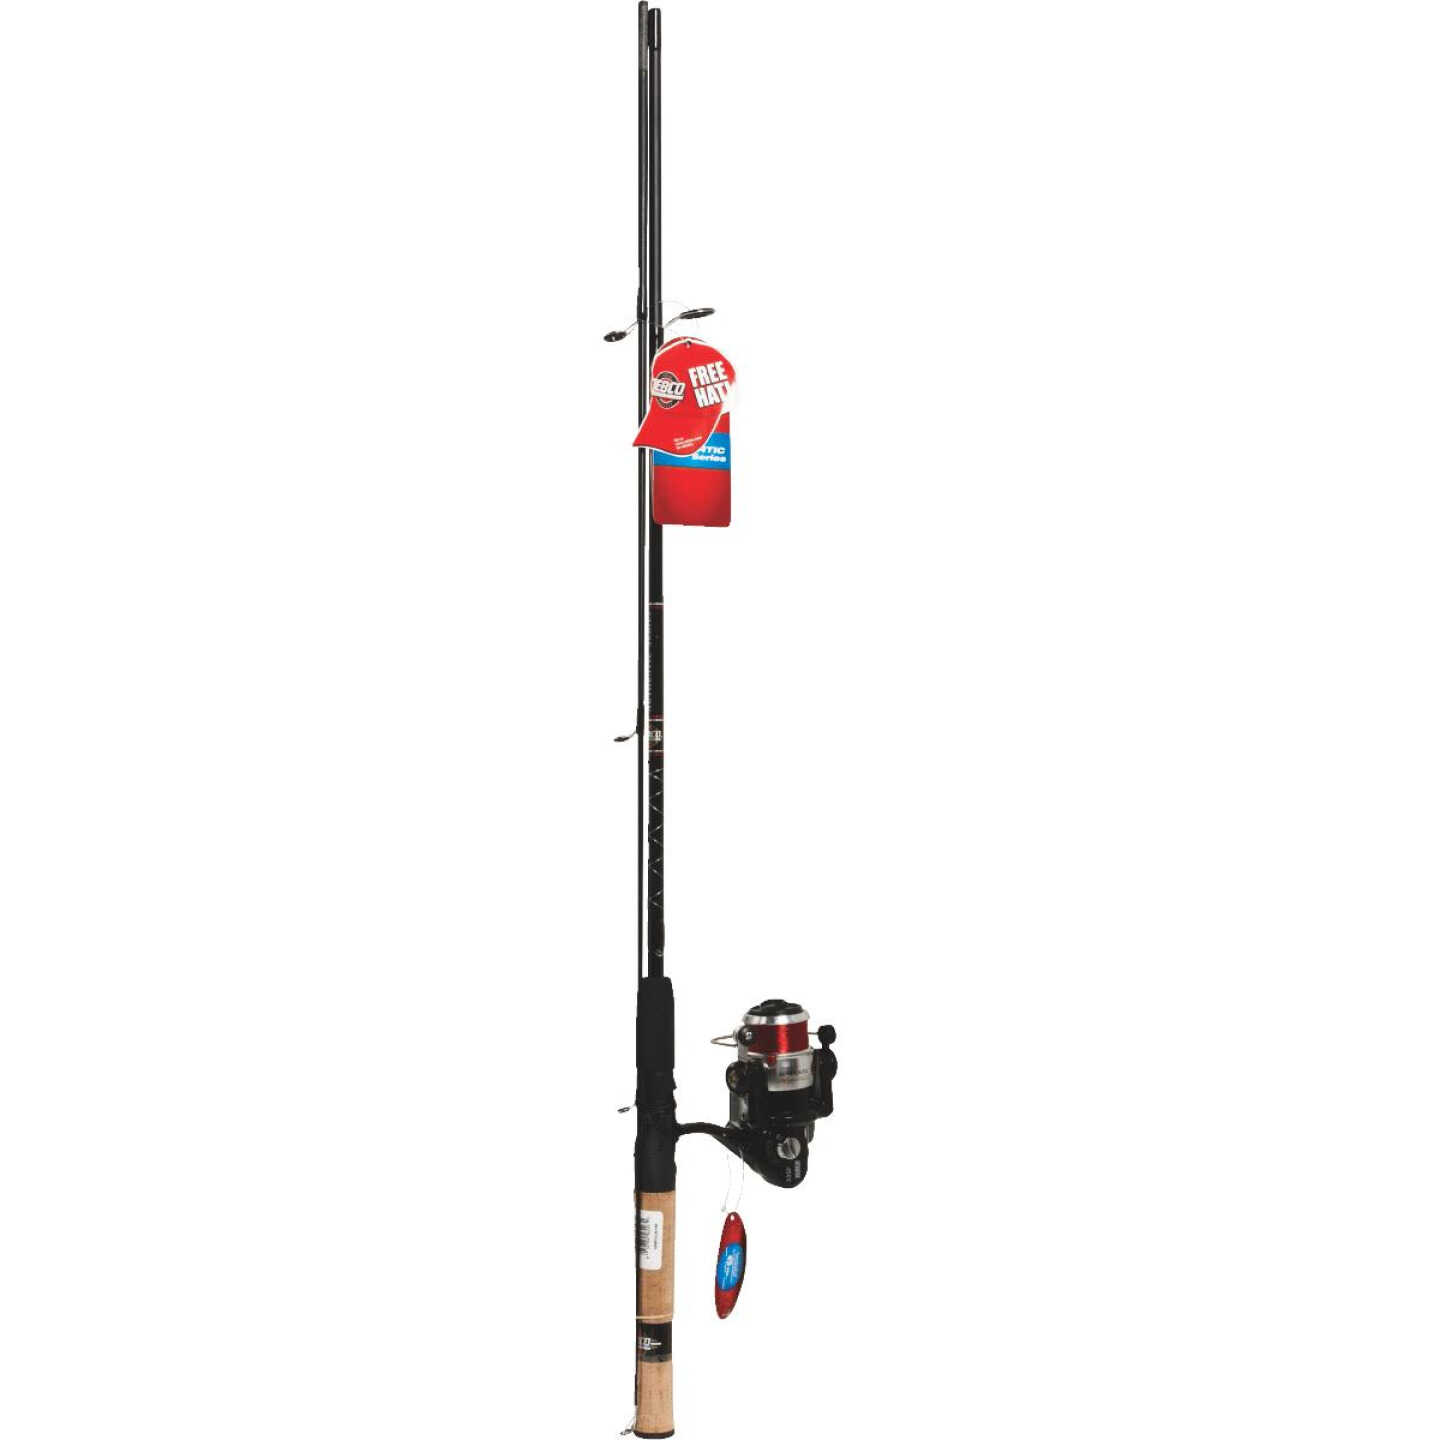 Zebco 33 Spinning Reel and Telescopic Fishing Rod Combo (5 Foot